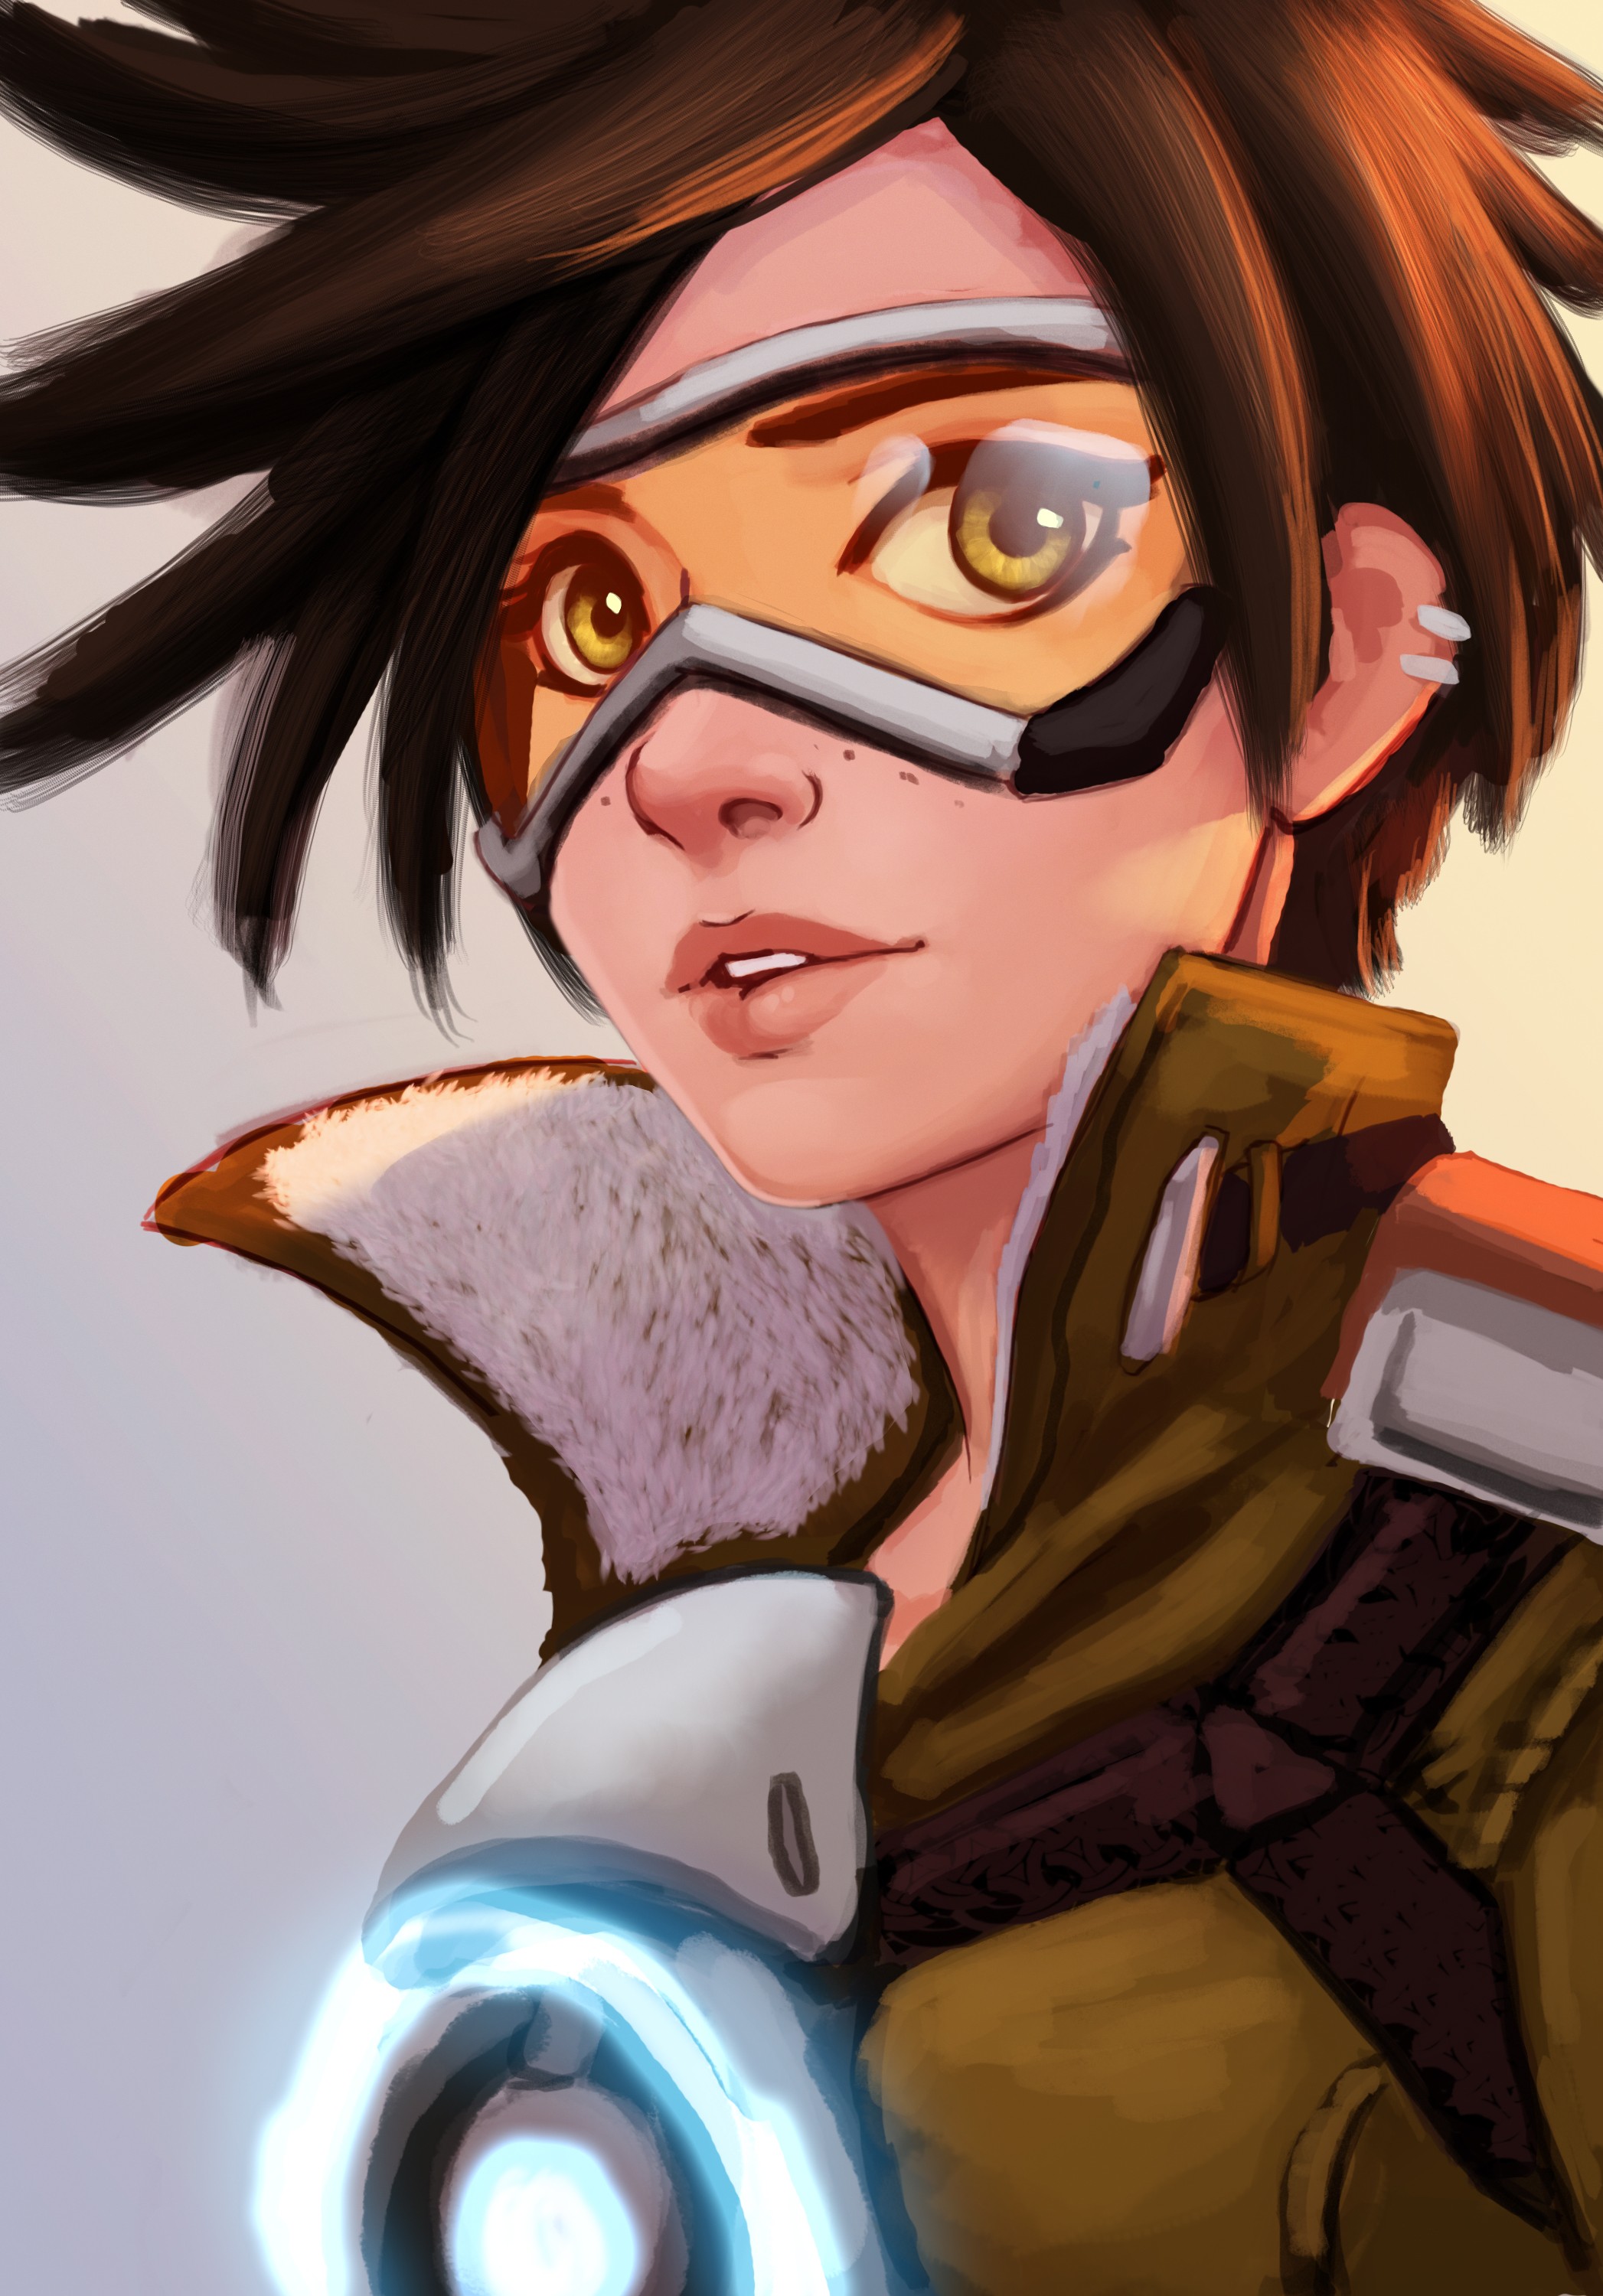 Anime 2094x3000 Overwatch Tracer (Overwatch) video games DeviantArt PC gaming video game girls video game characters women brunette shoulder length hair goggles yellow eyes